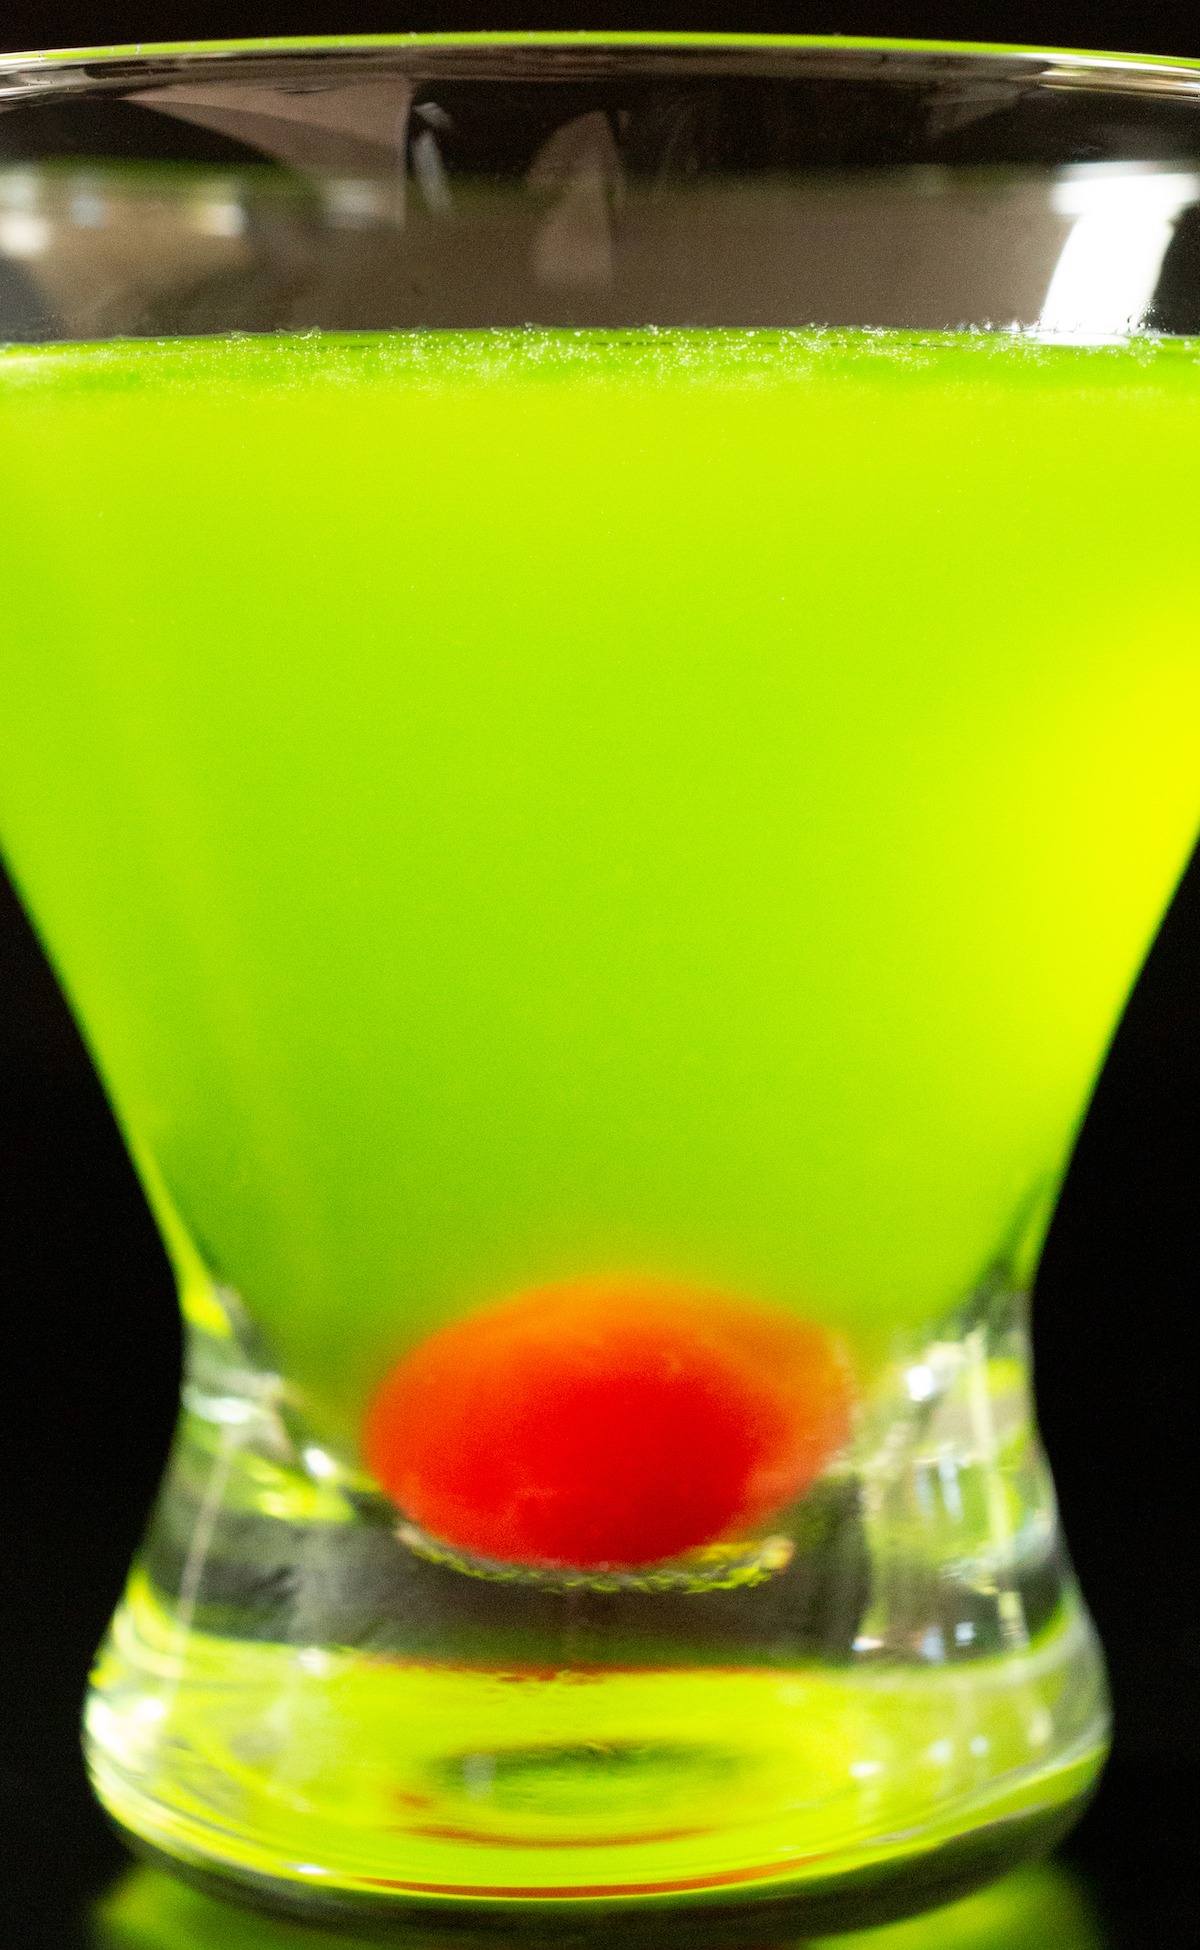 A stemless martini glass is filled with a neon green japanese slipper cocktail. There is a stemless maraschino cherry in the bottom of the glass.